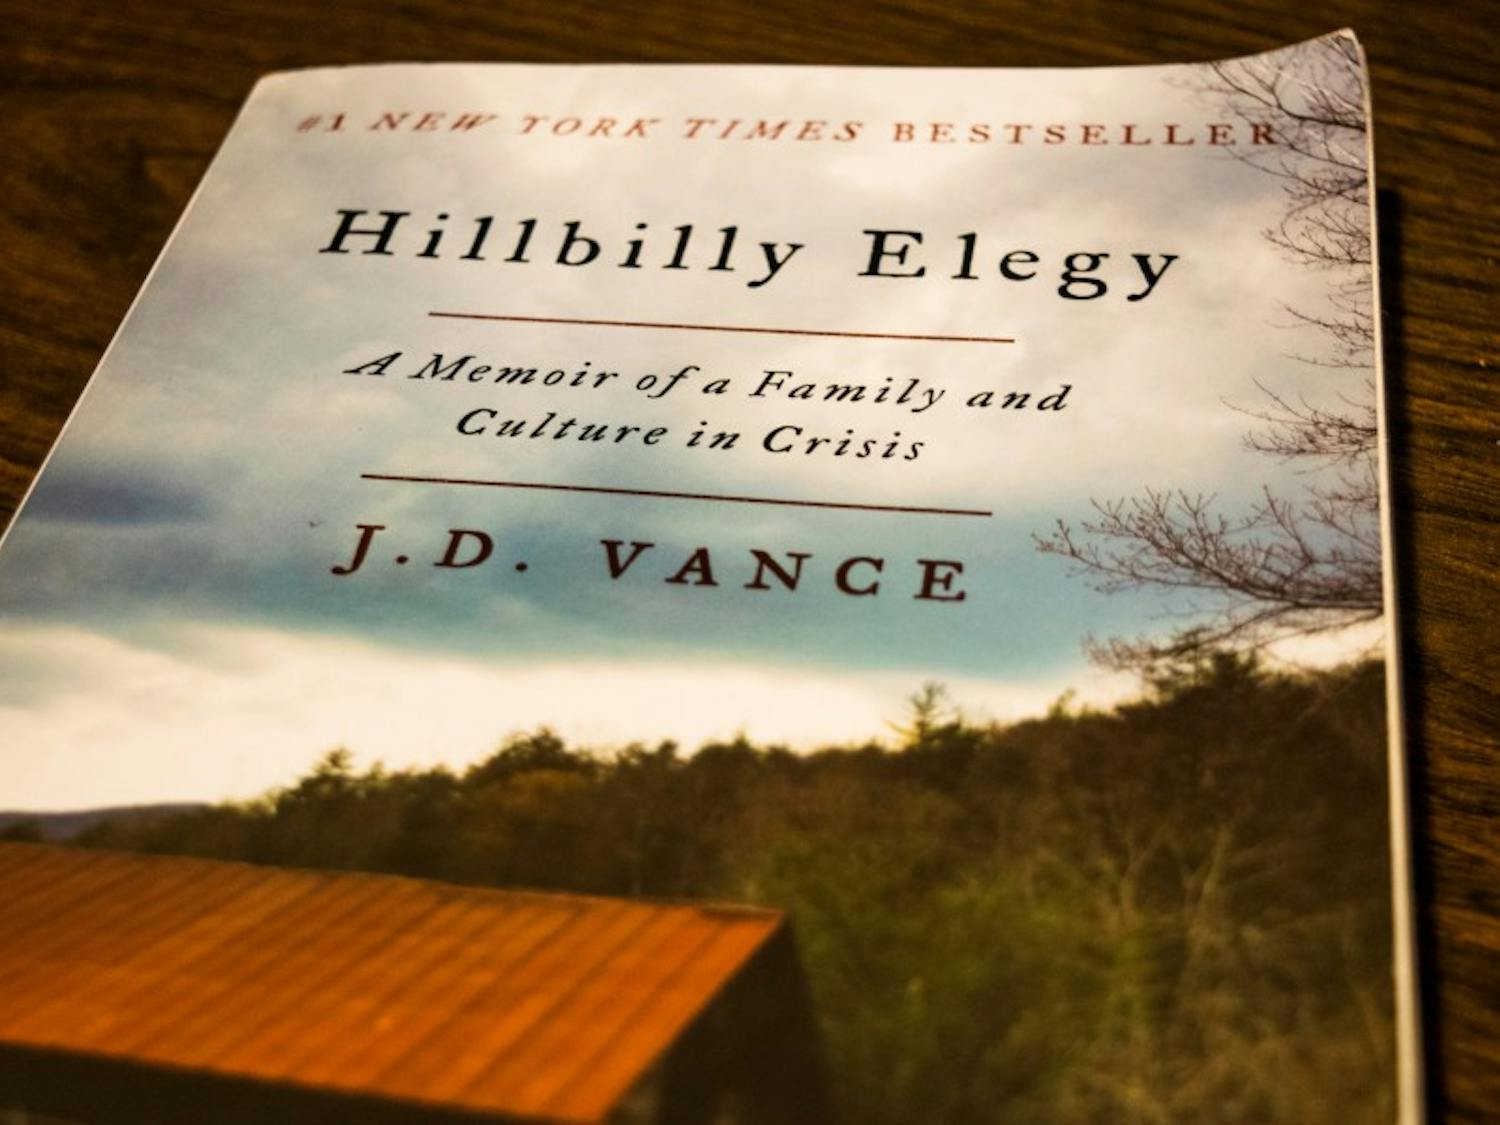 “Hillbilly Elegy” is UW-Madison’s Go Big Read for the 2017-18 school year. Some experts think it’s a bad choice.